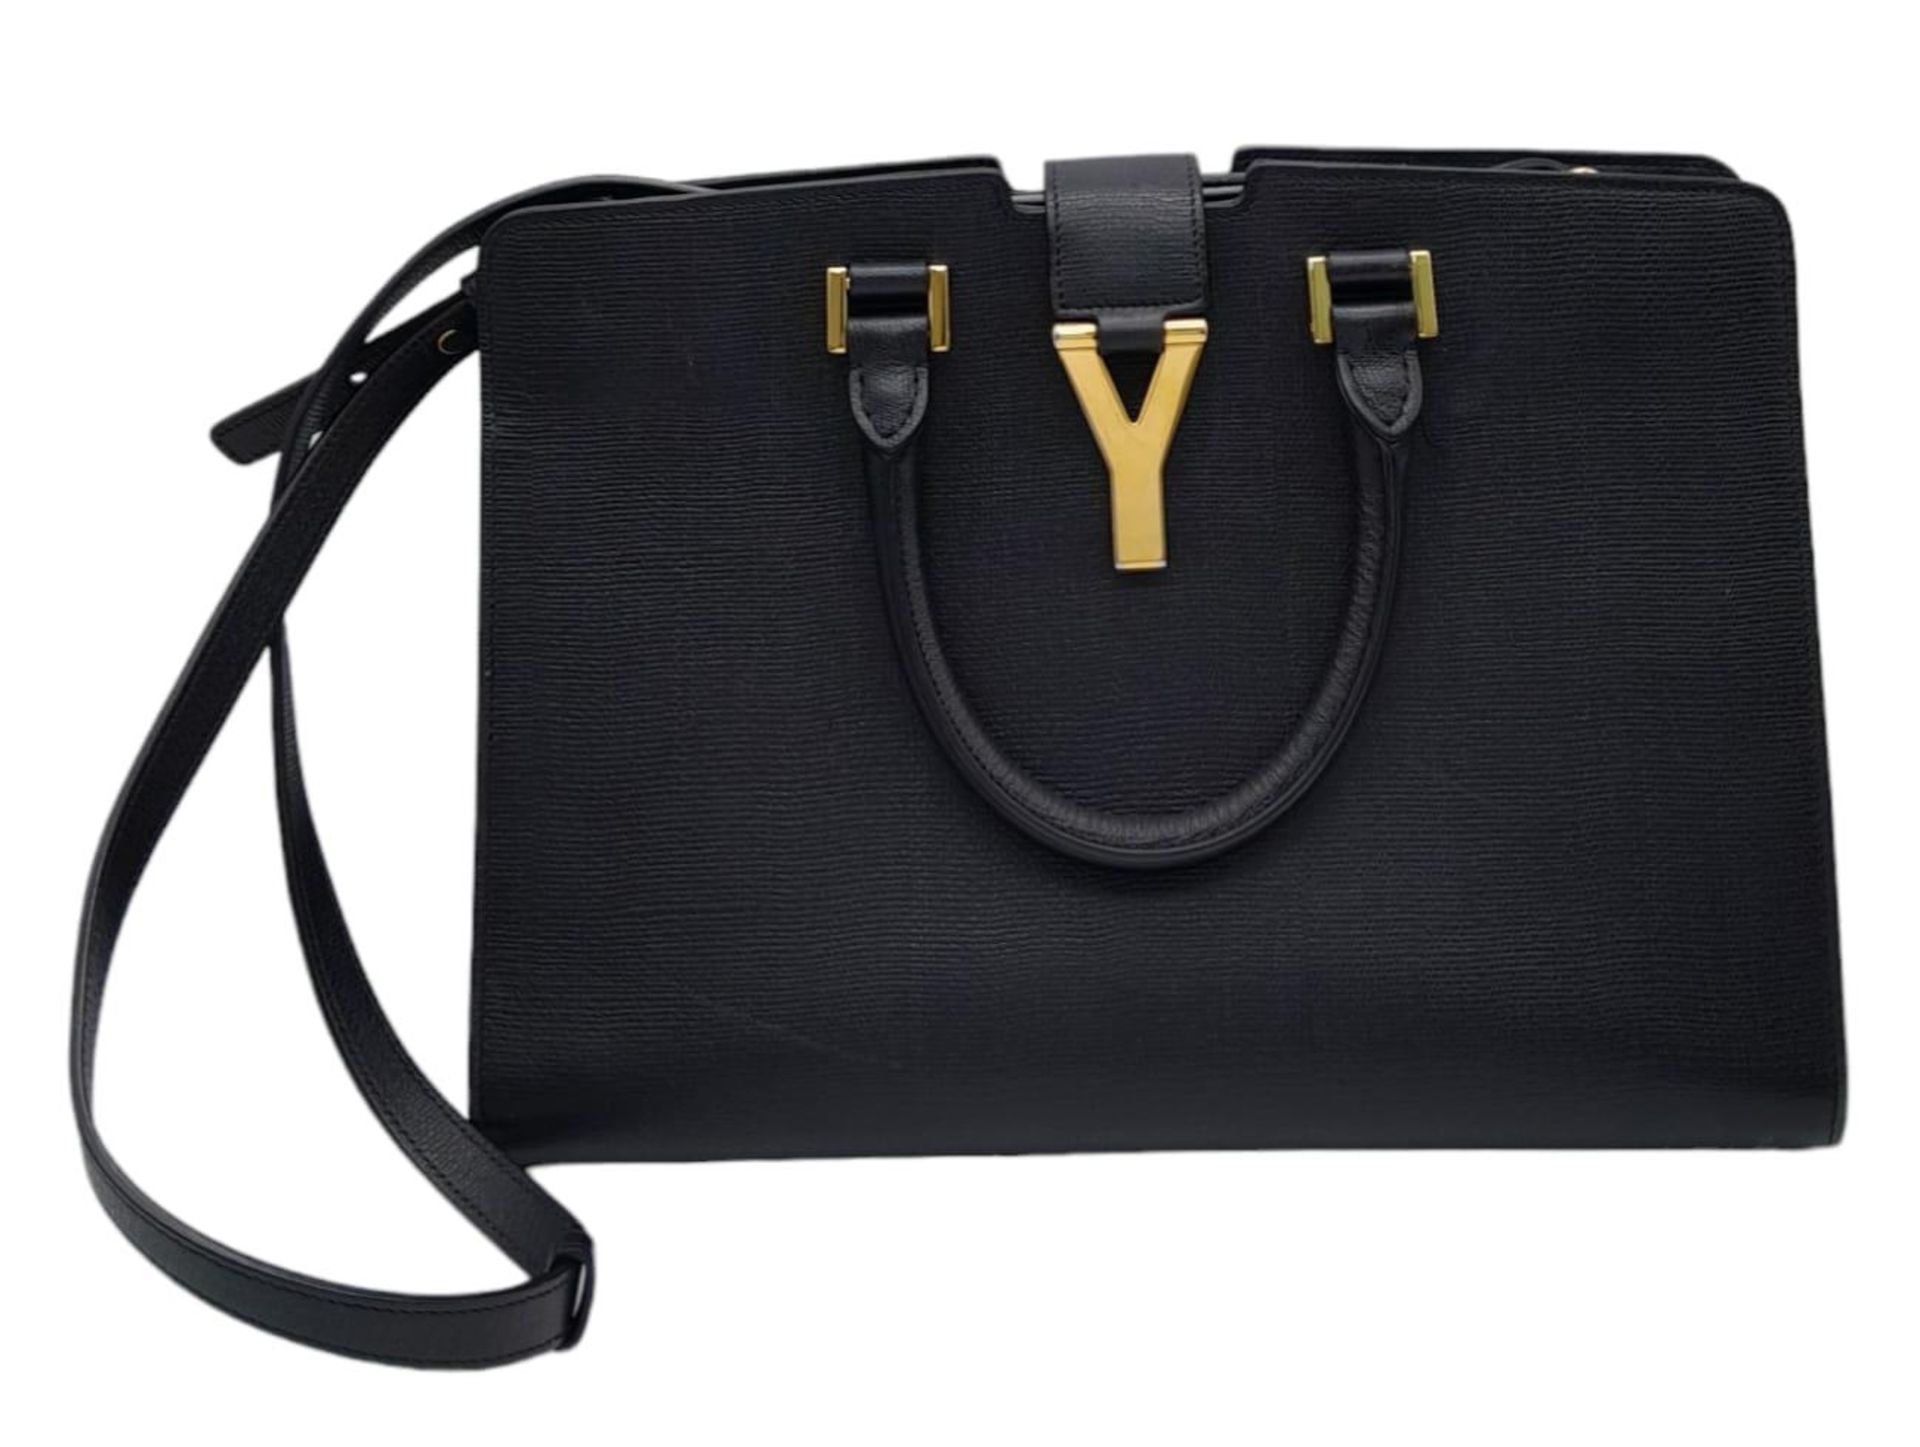 An Yves Saint Laurent Black 'Cabas' Handbag. Leather exterior with gold-toned hardware, two rolled